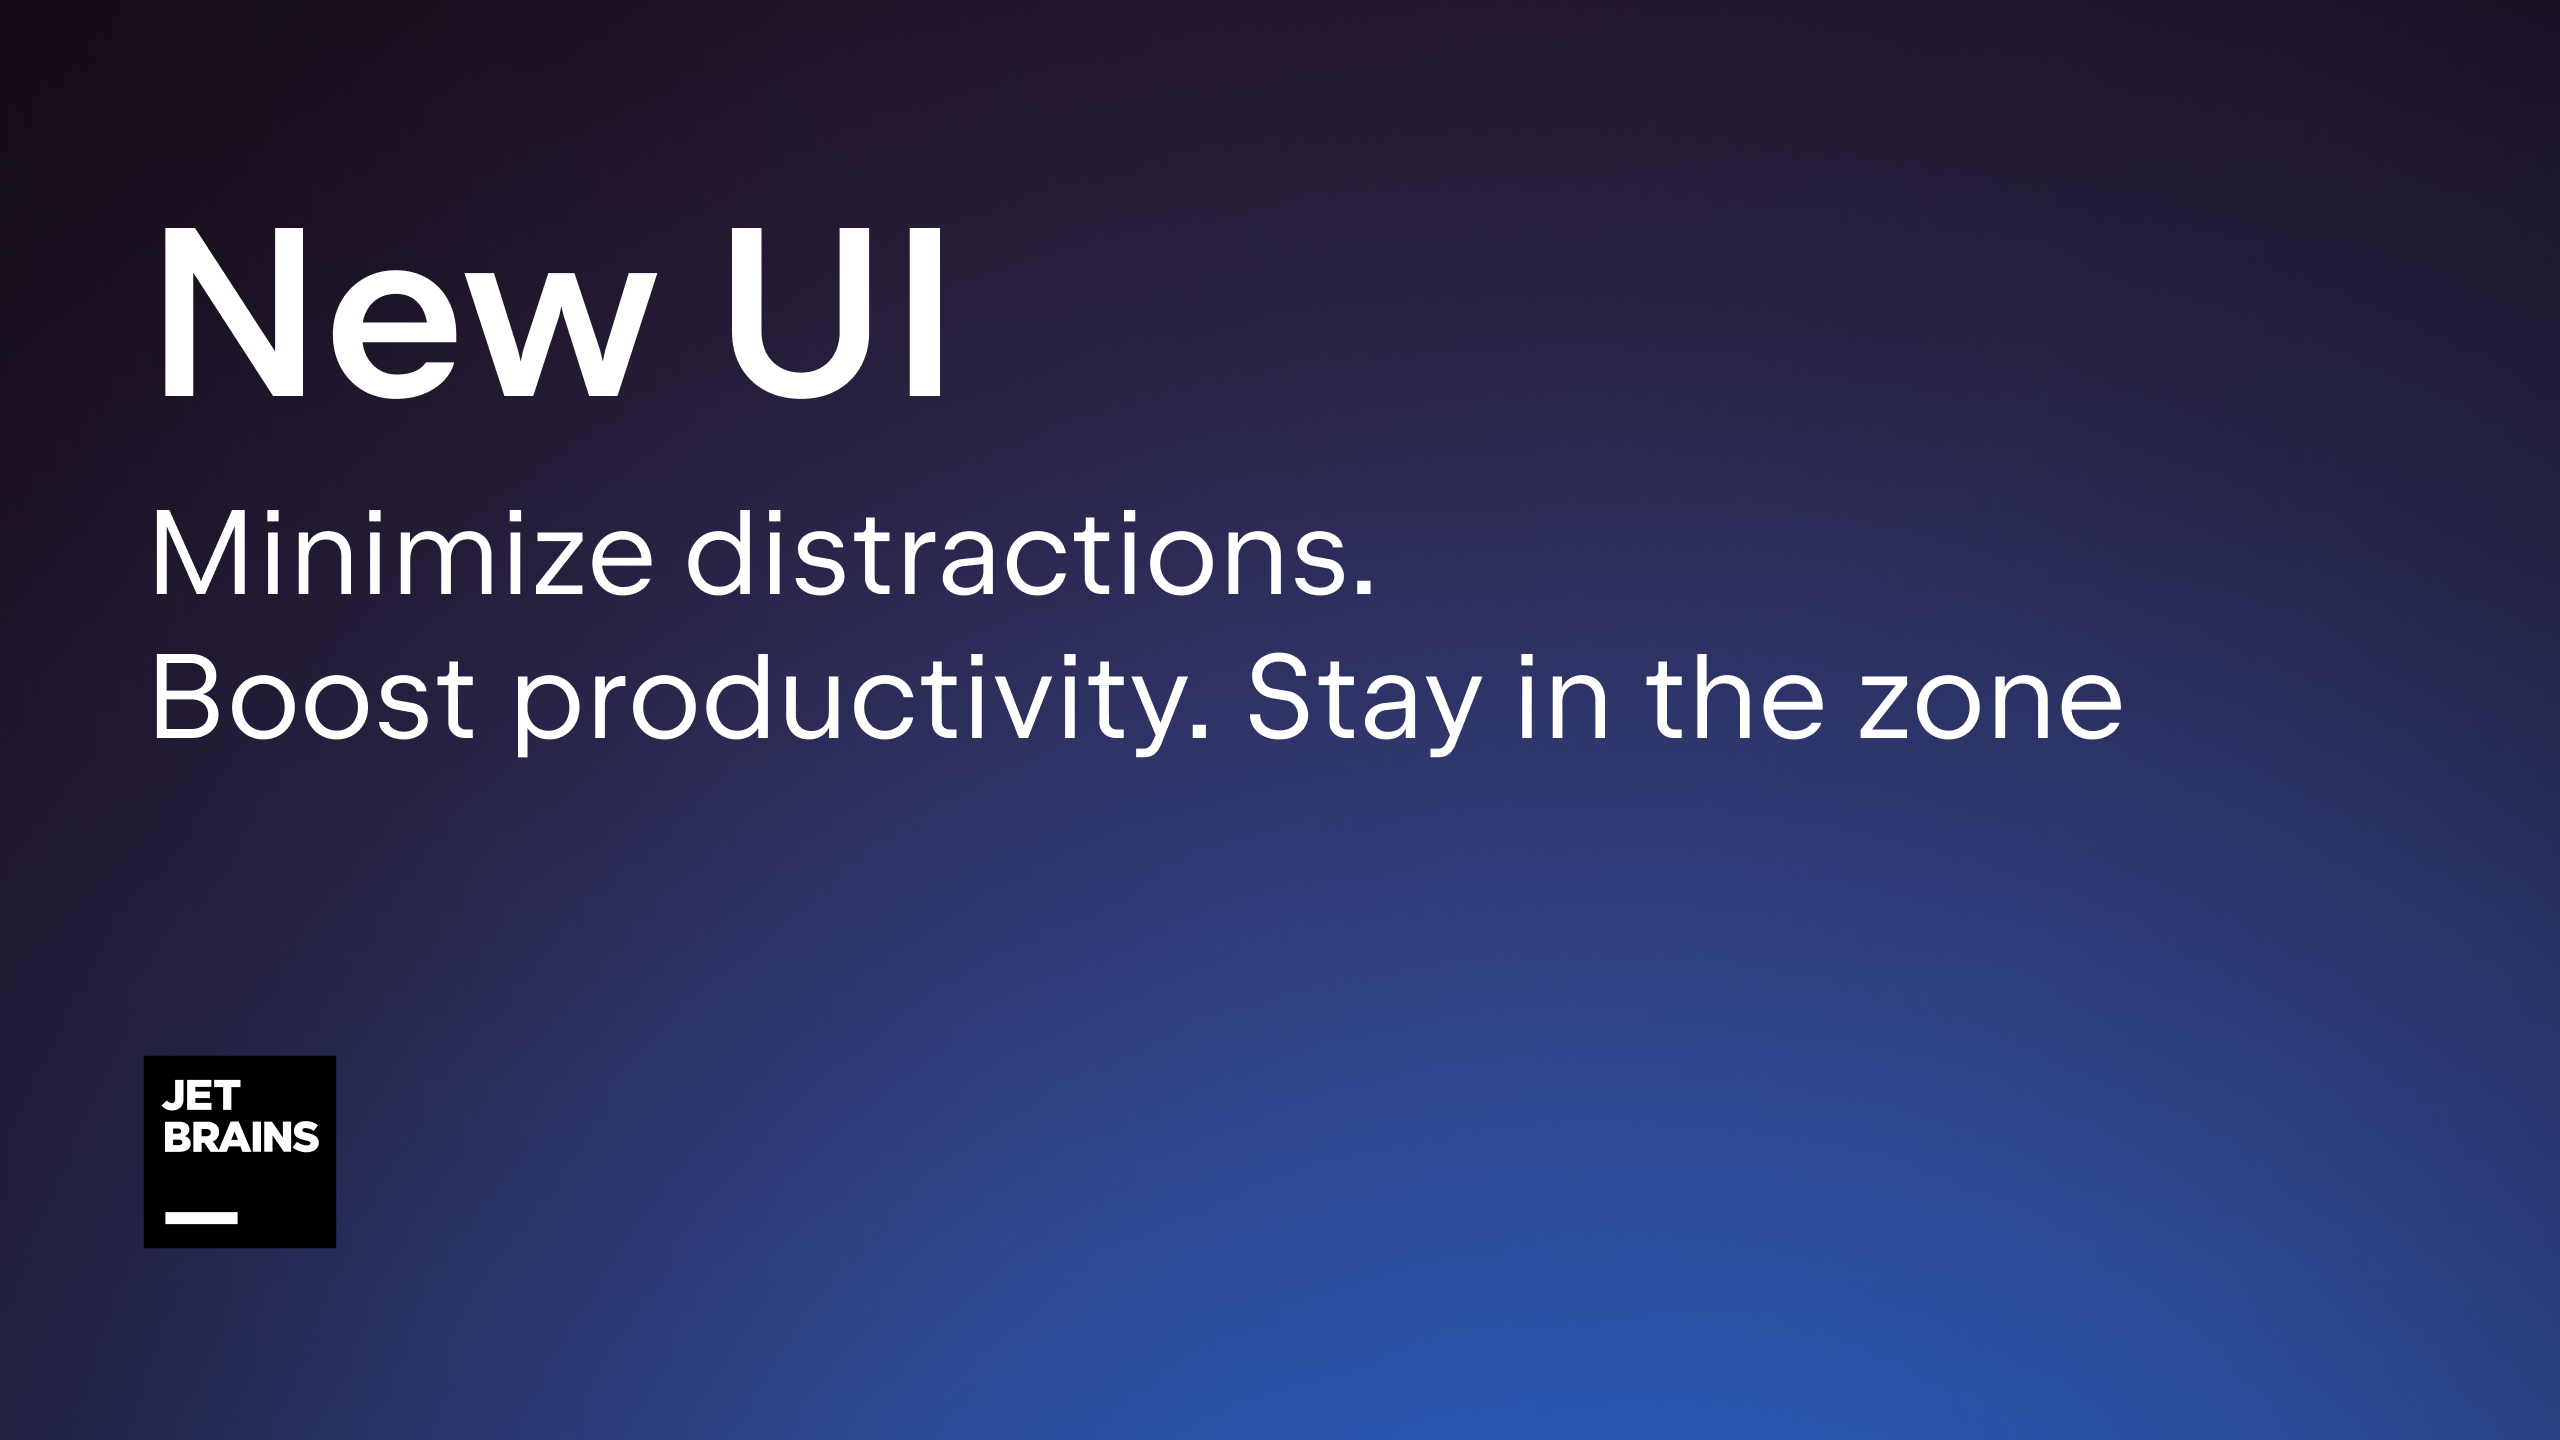 New UI - Minimize distractions. Boost productivity. Stay in the zone.